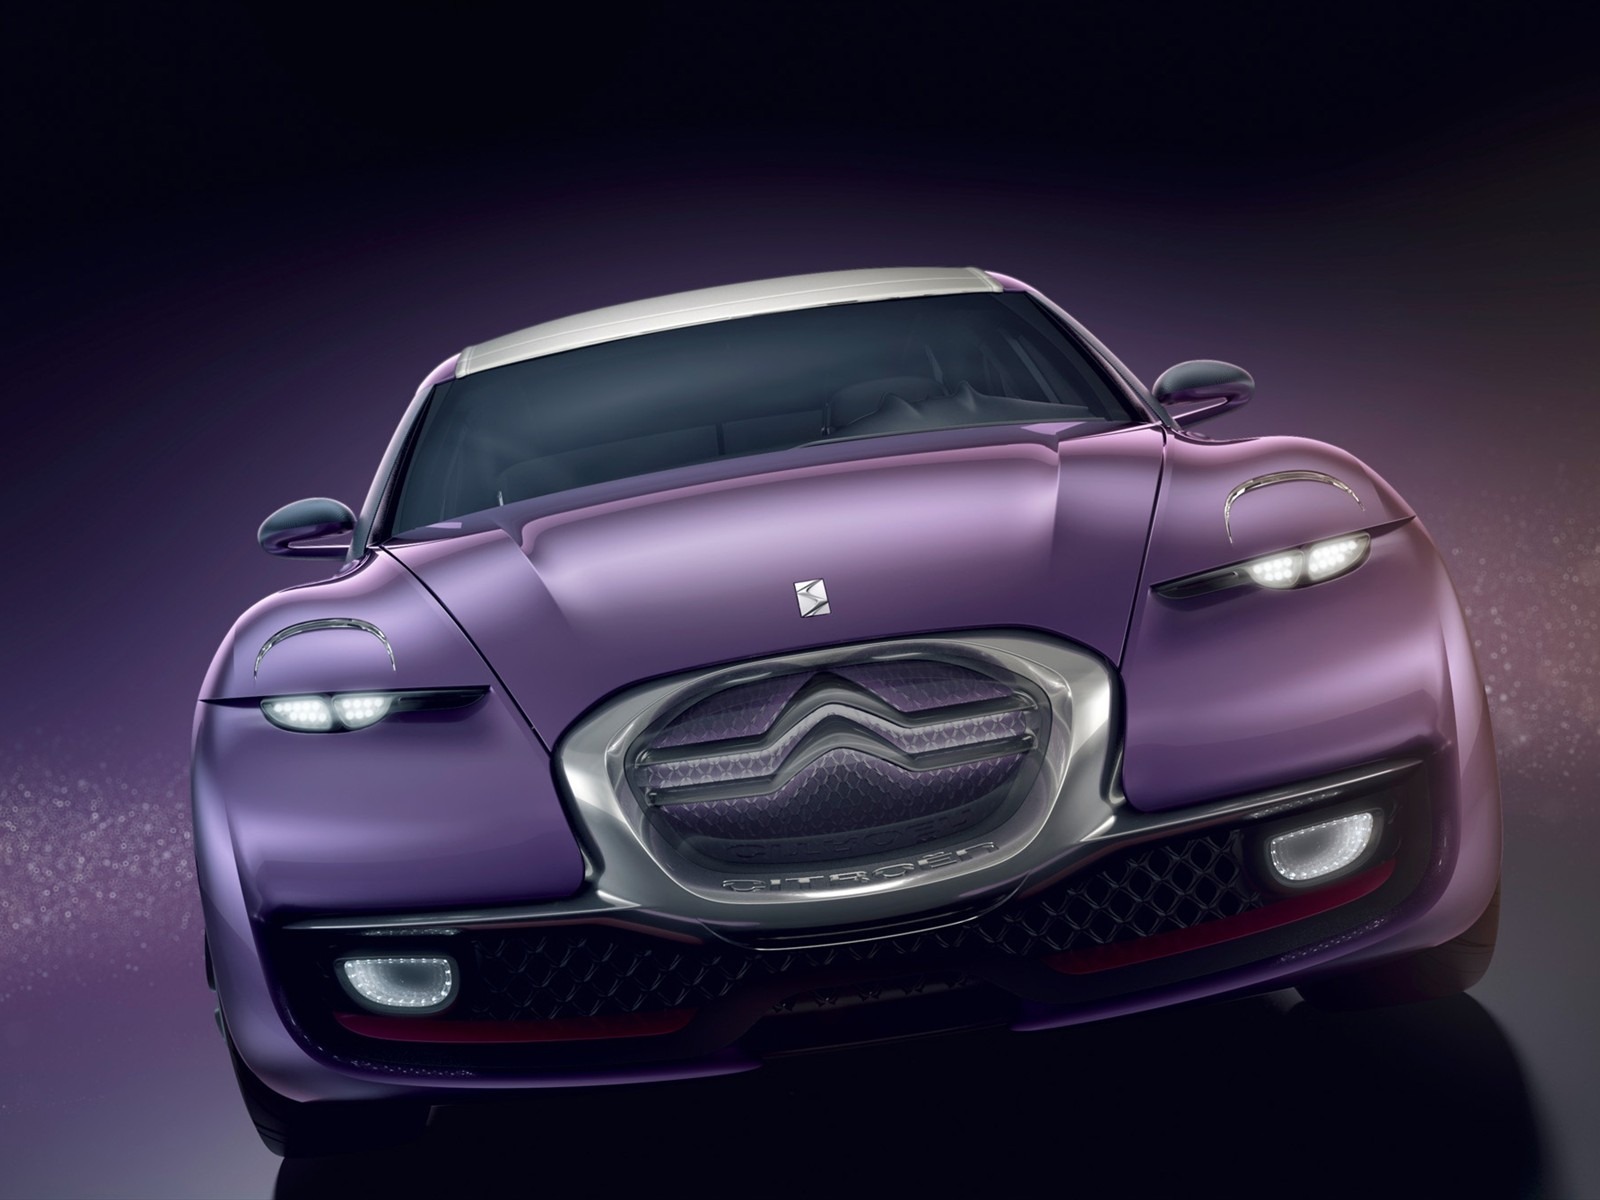 Special edition of concept cars wallpaper (13) #11 - 1600x1200